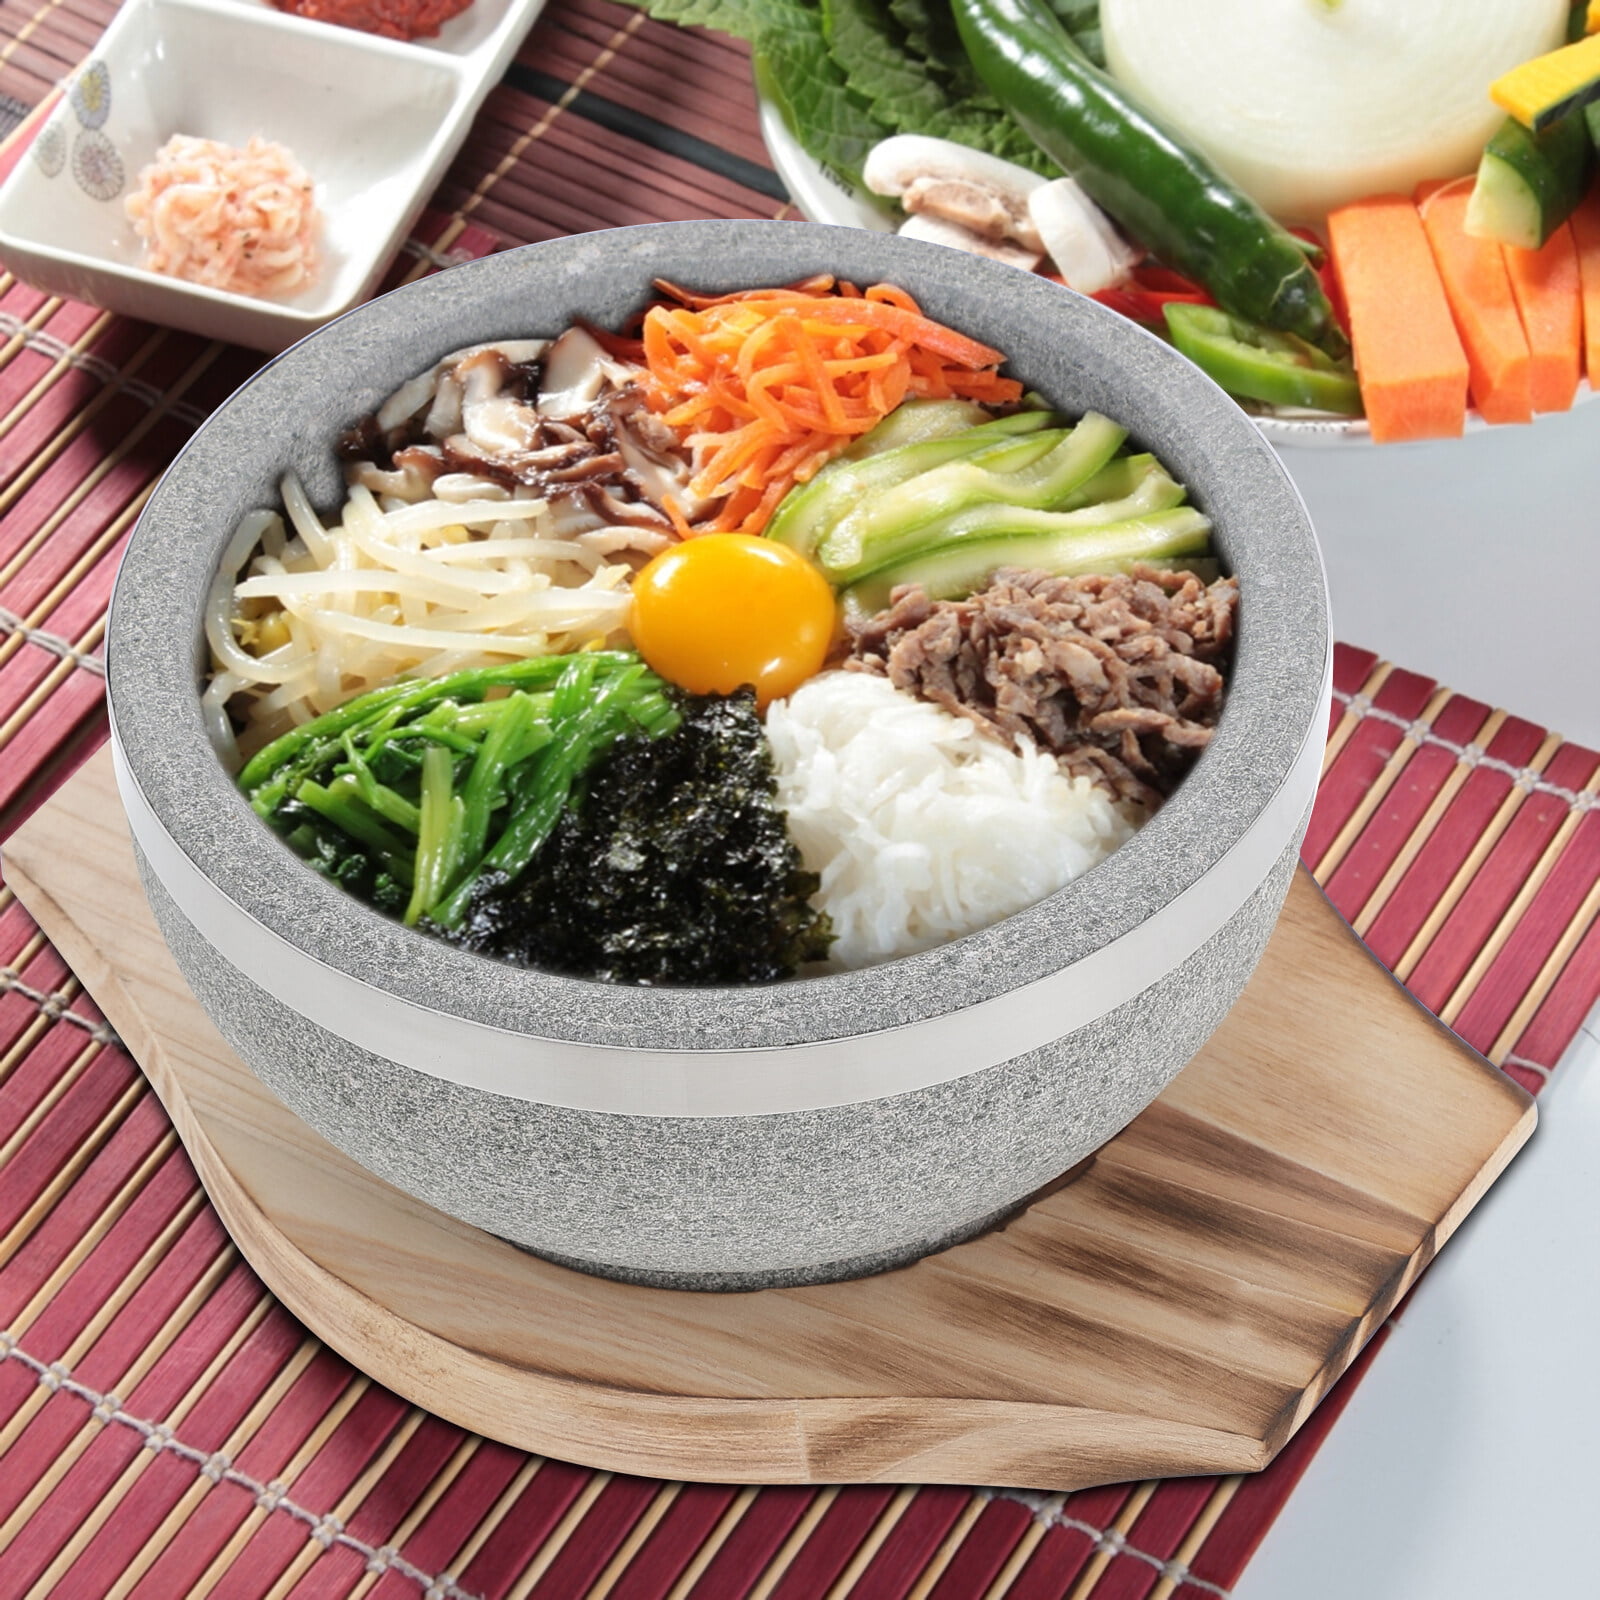 Clay Pot for Cooking Korean Stone Bowl,Korean Cooking Pot,Donabe Rice  Cooker,Hand-Crafted Speckled Ceramic Pot Casserole,Dolsot Bibimbap Bowl,Hot  Pot